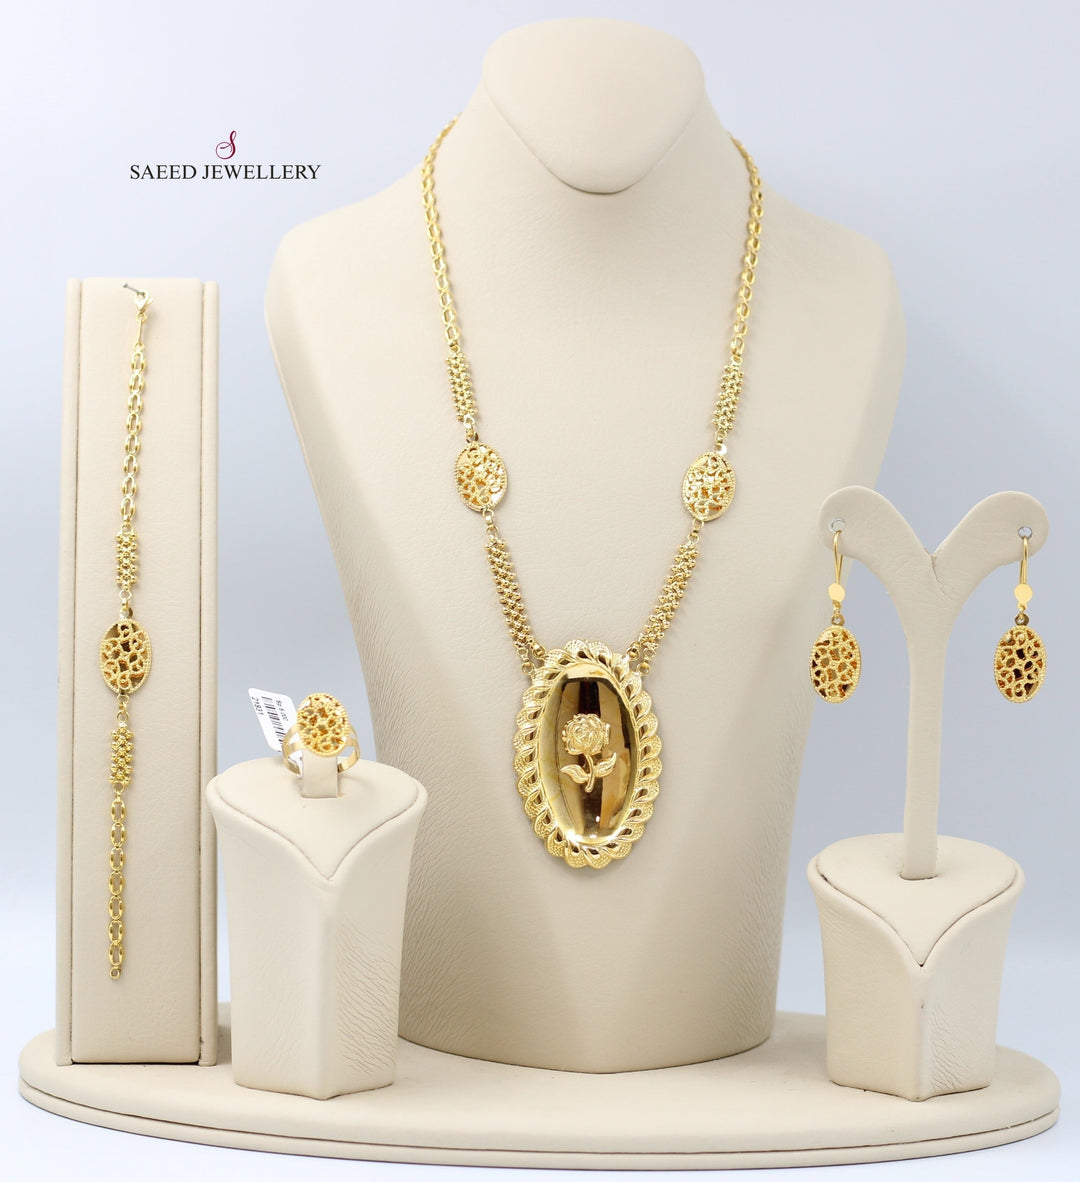 21K Gold Ounce set by Saeed Jewelry - Image 1